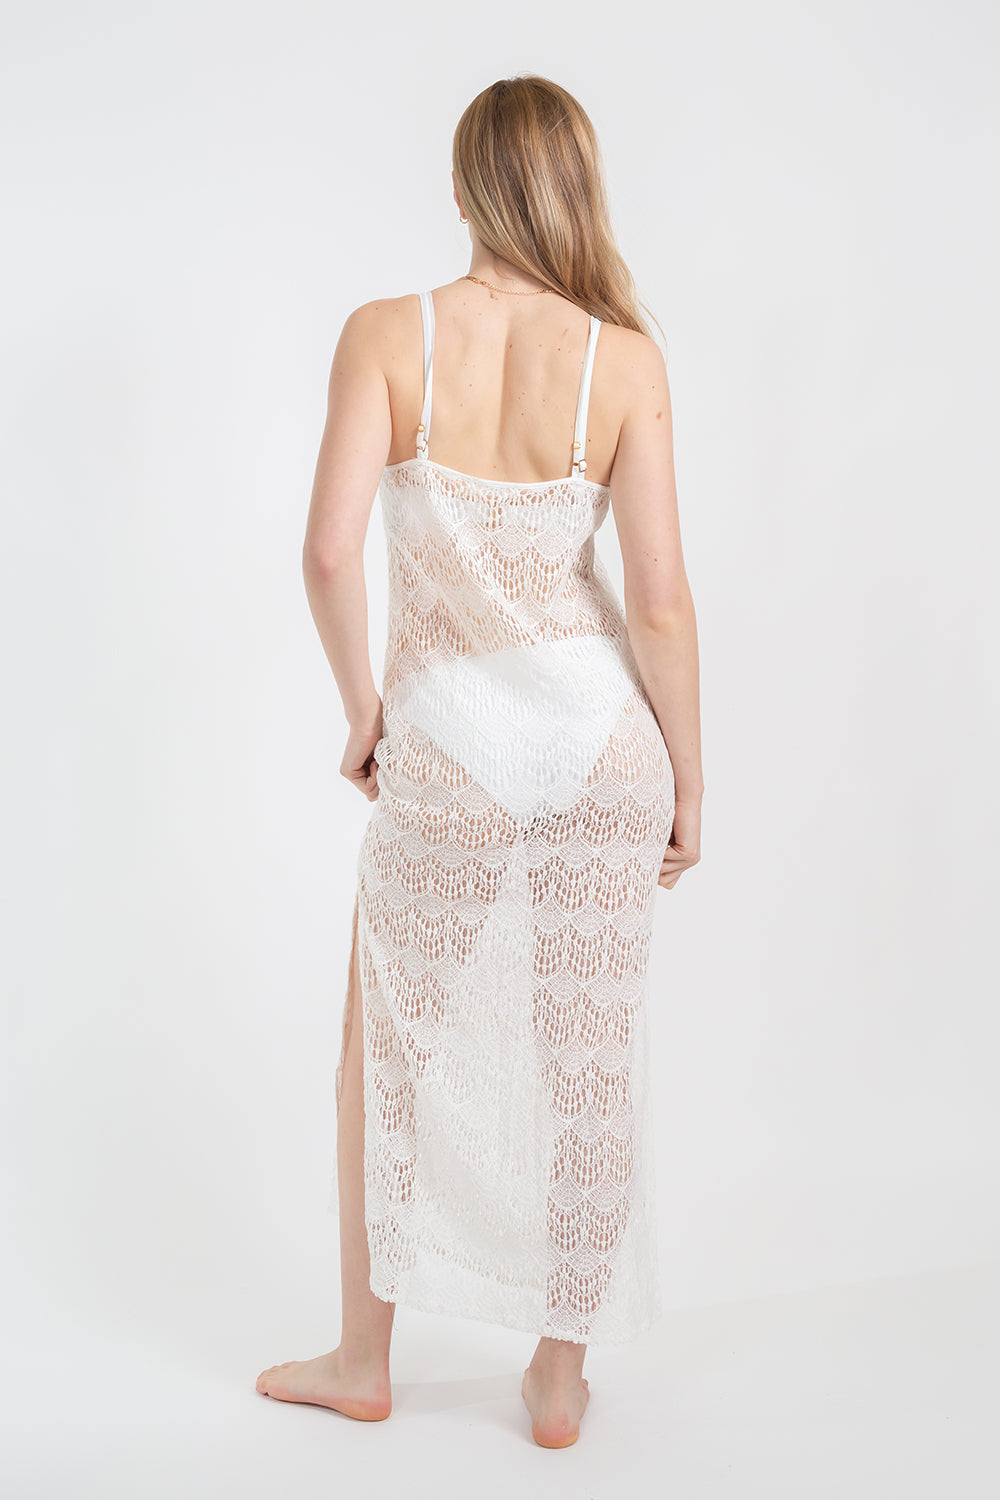 Koy Resort vacation, resort and beachwear. Model facing back wearing white cream lace flamenco cover up midi dress with adjustable spaghetti straps and slits